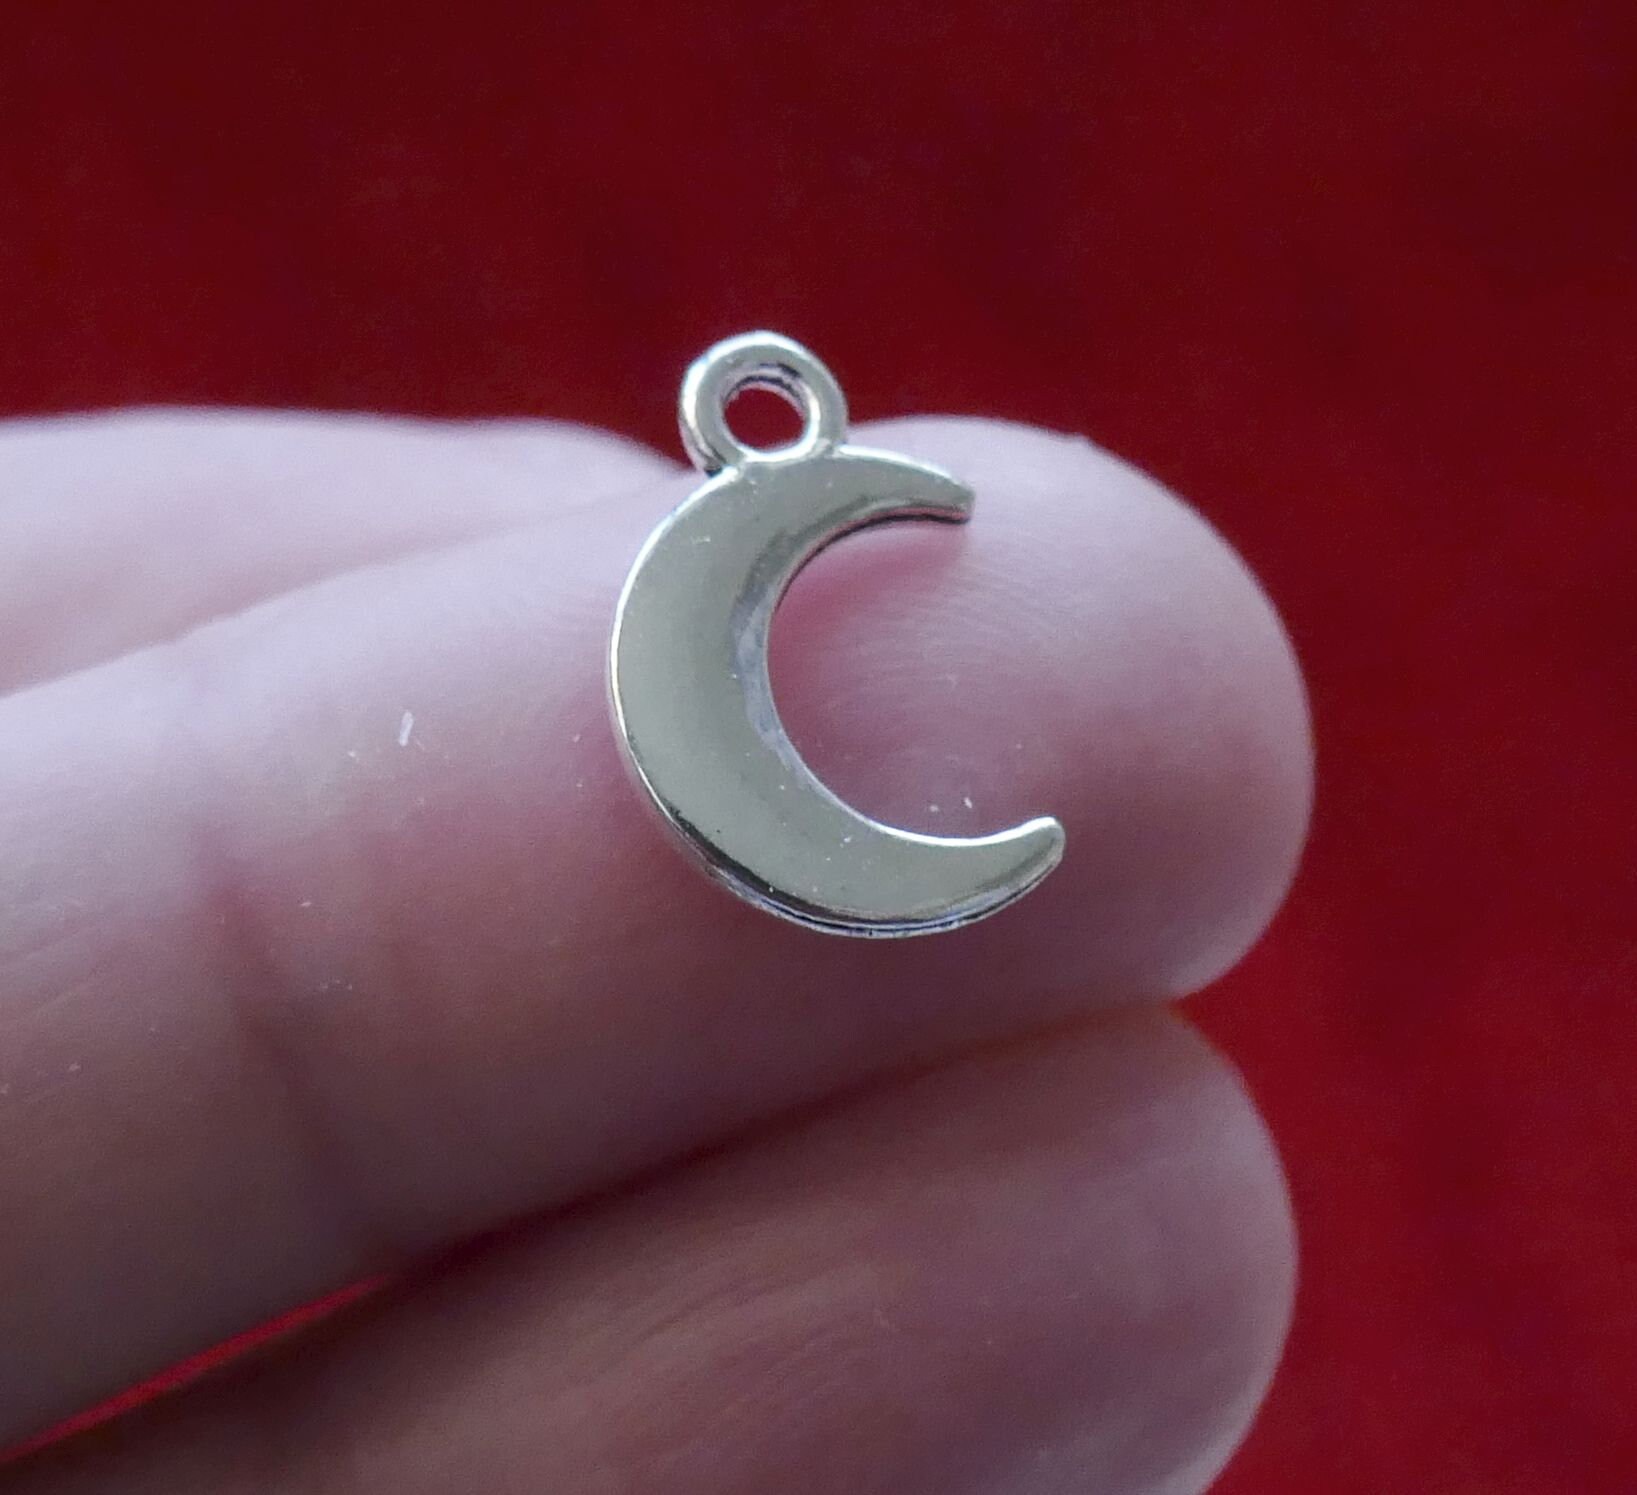 30 x Small Tibetan Silver Crescent Moon Charms Pendants Jewelry Findings For DIY 